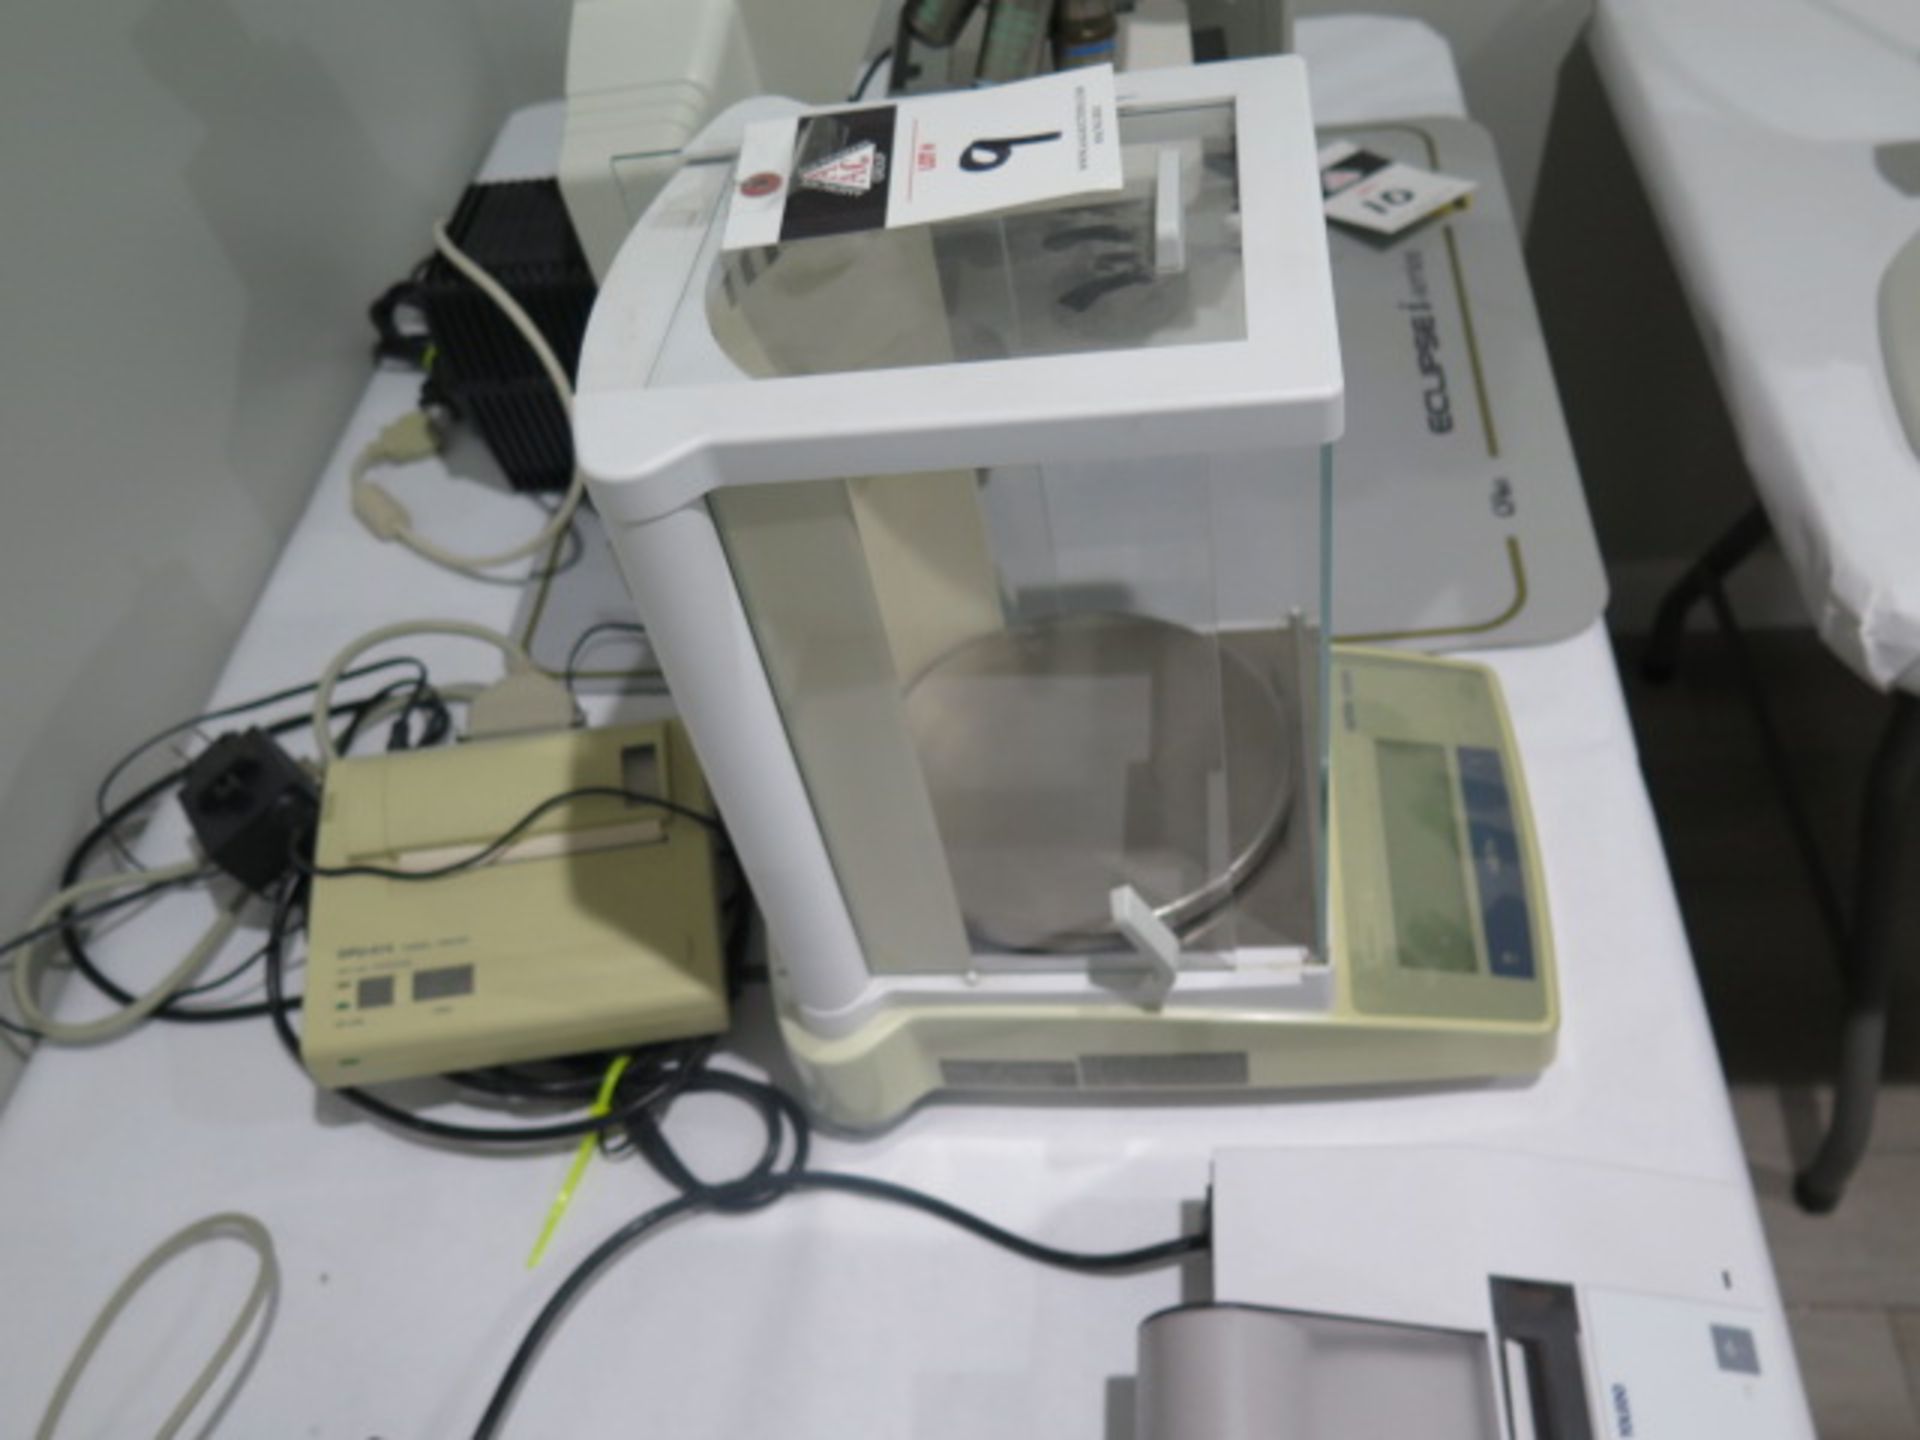 Mettler Toledo PB3002-S 3000g Digital Scale w/ Printer and Enclosure (SOLD AS-IS - NO WARRANTY) - Image 2 of 6